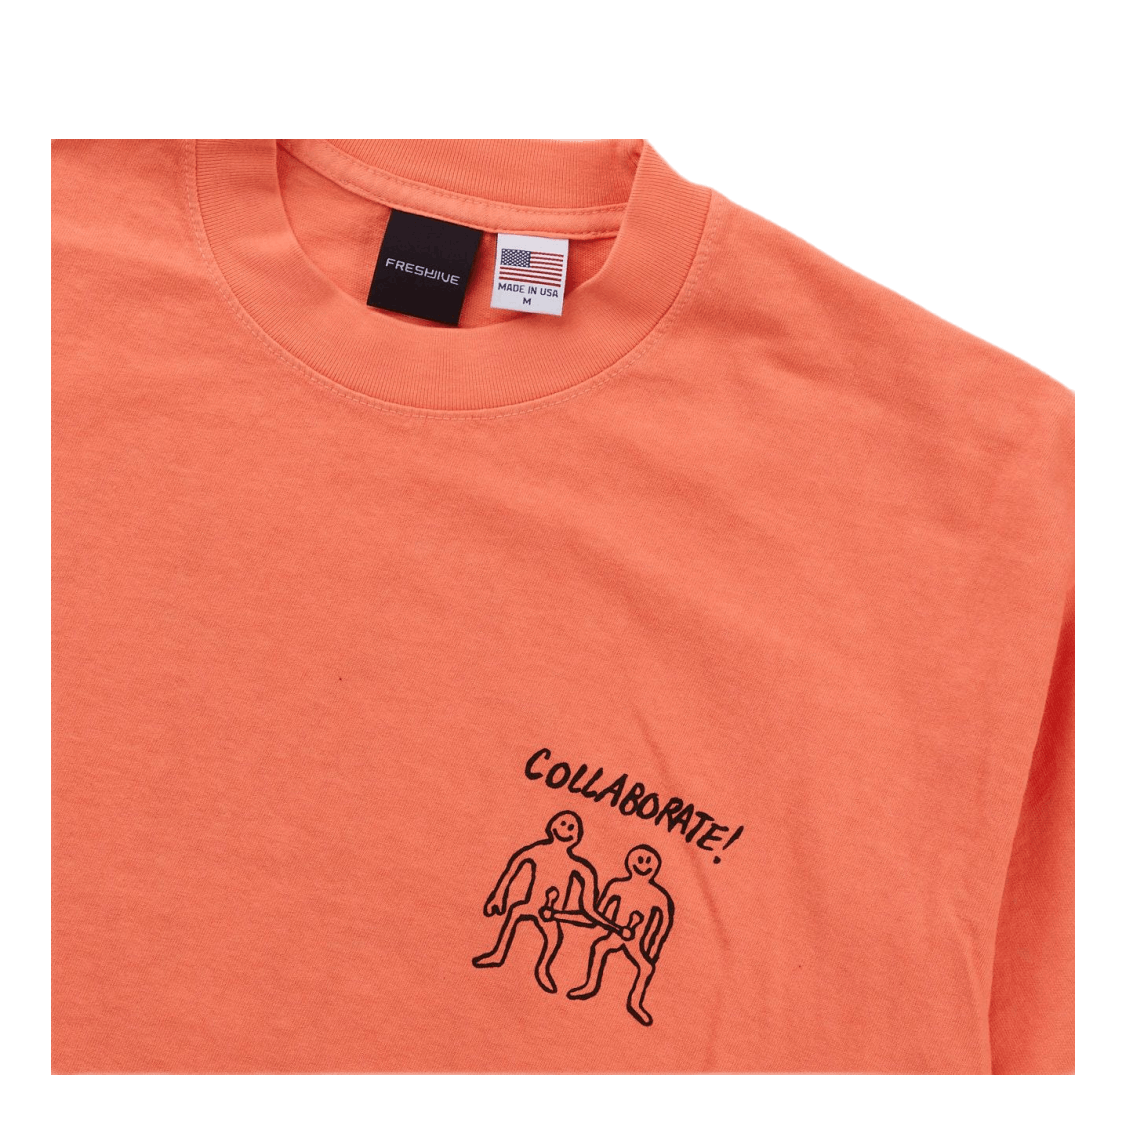 Collaborate S/s Tee Coral